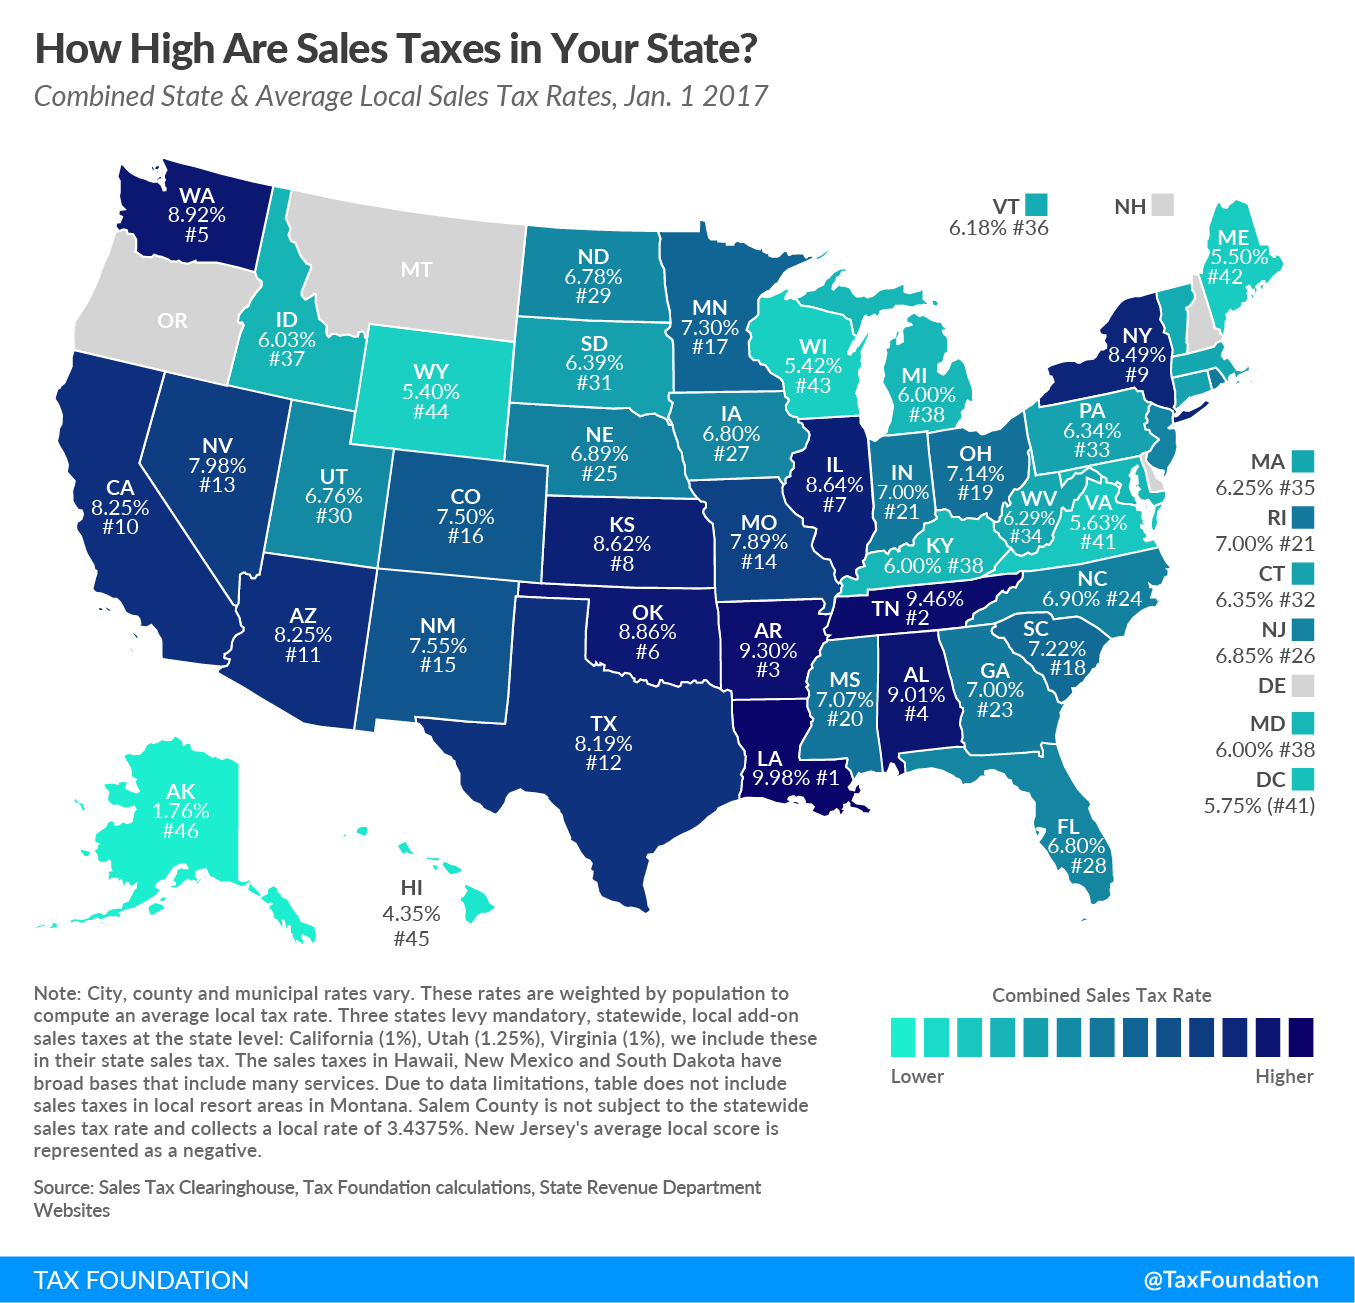 State and Local Sales Tax Rates in 2017